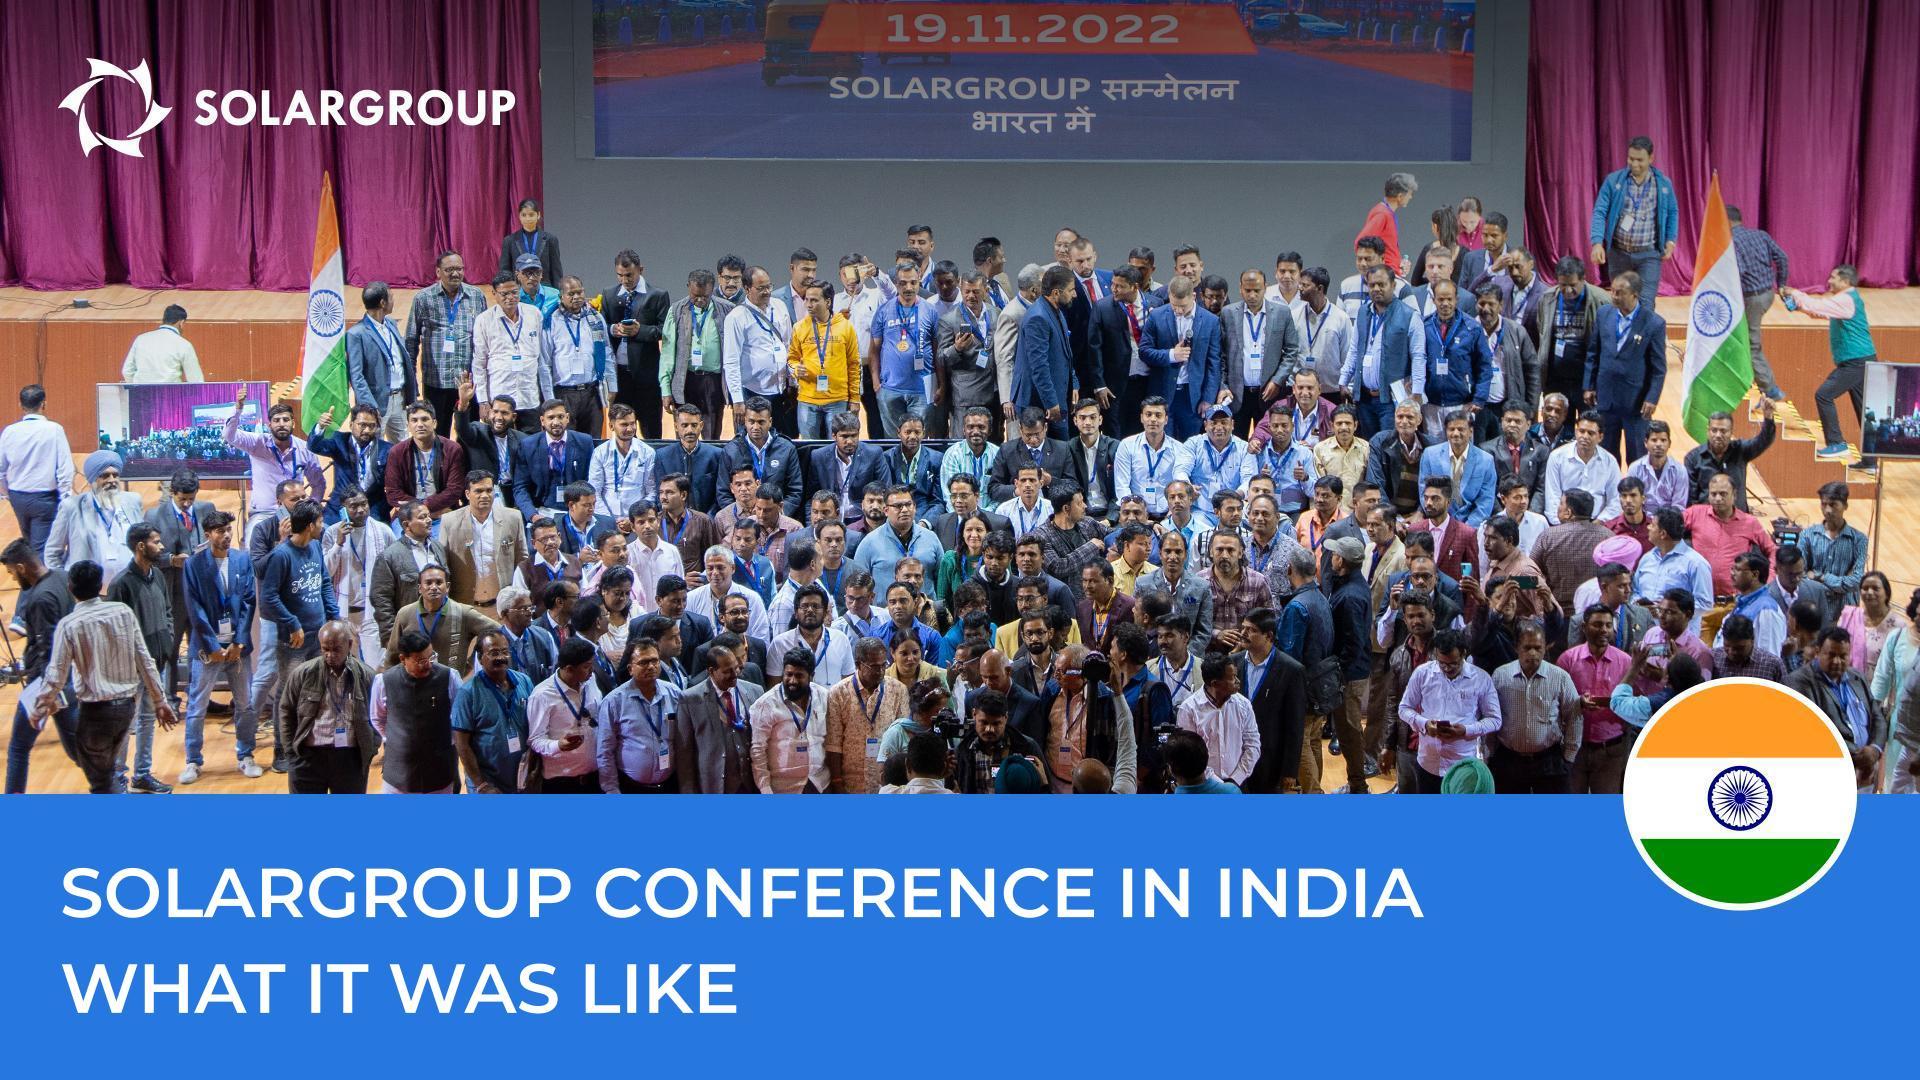 SOLARGROUP conference in India: what the event is memorable for